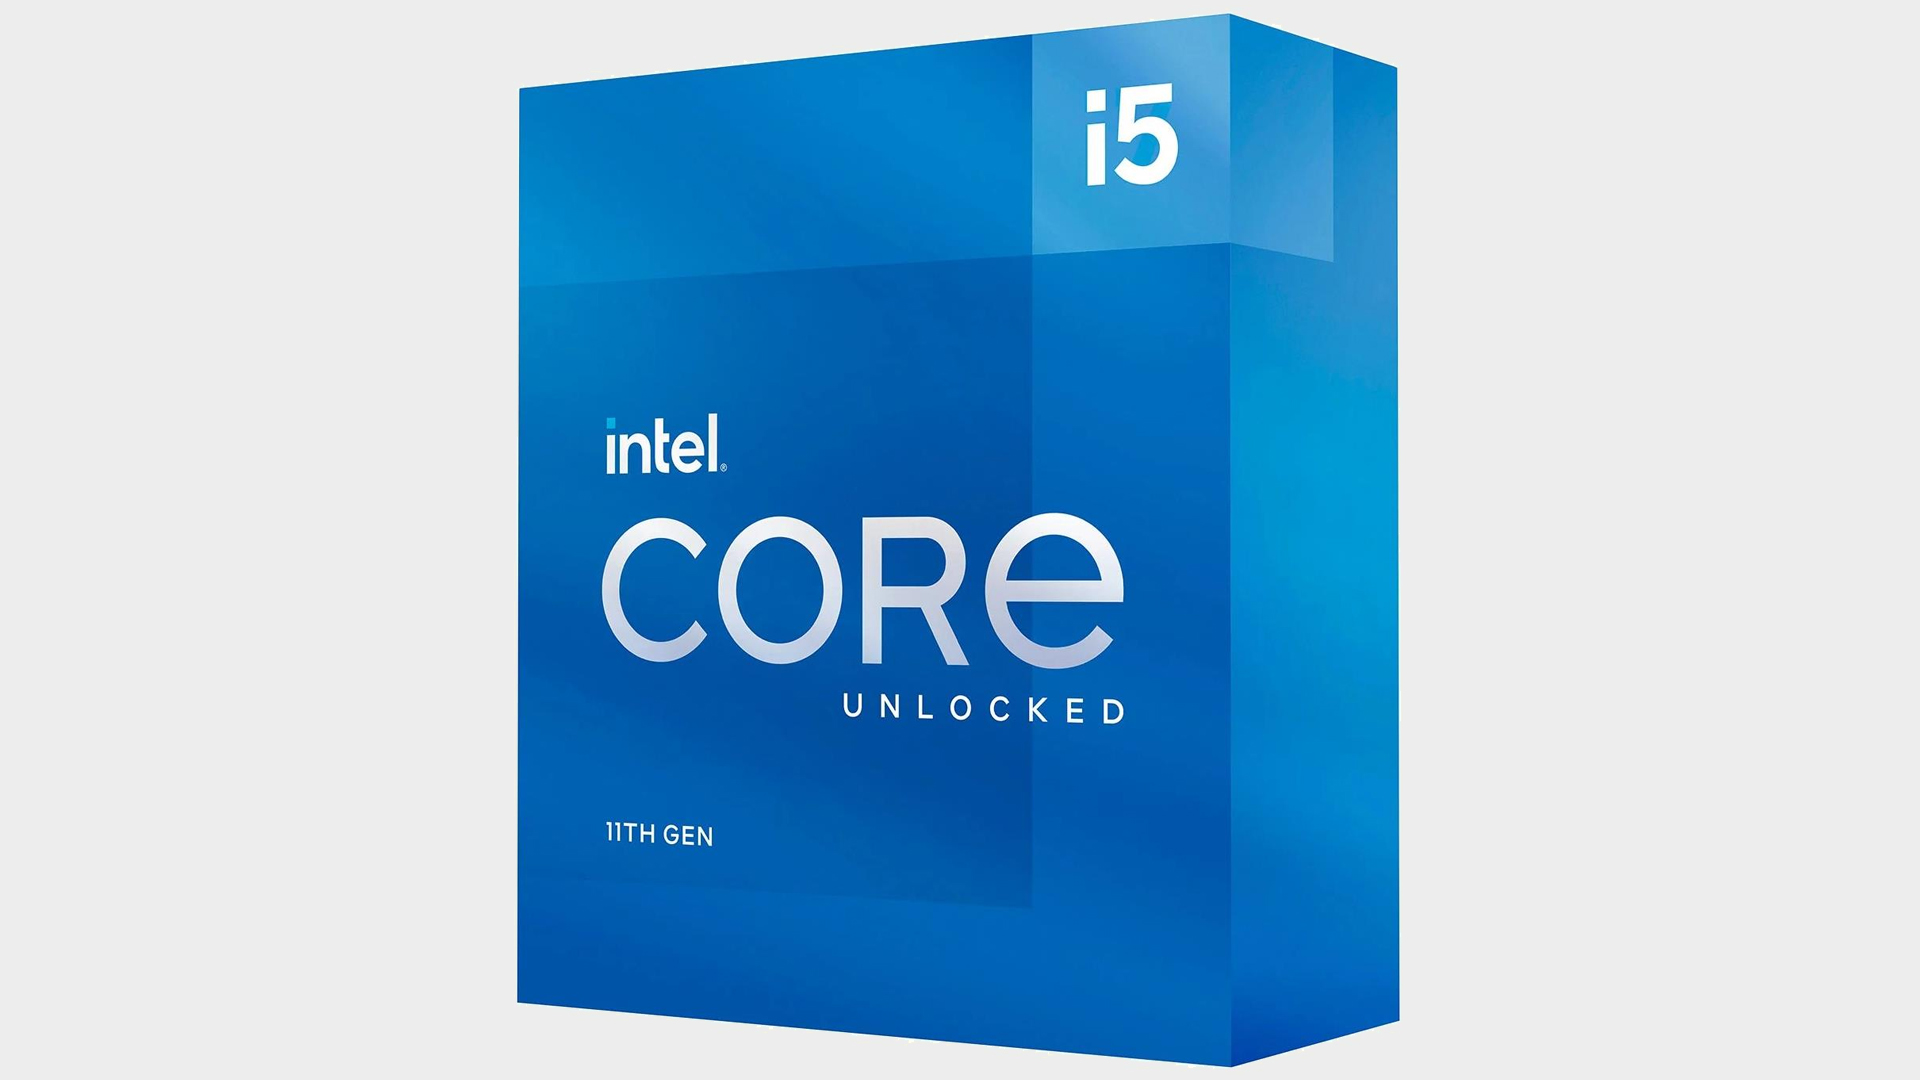 Best CPU for gaming: Intel Core i5-11600K